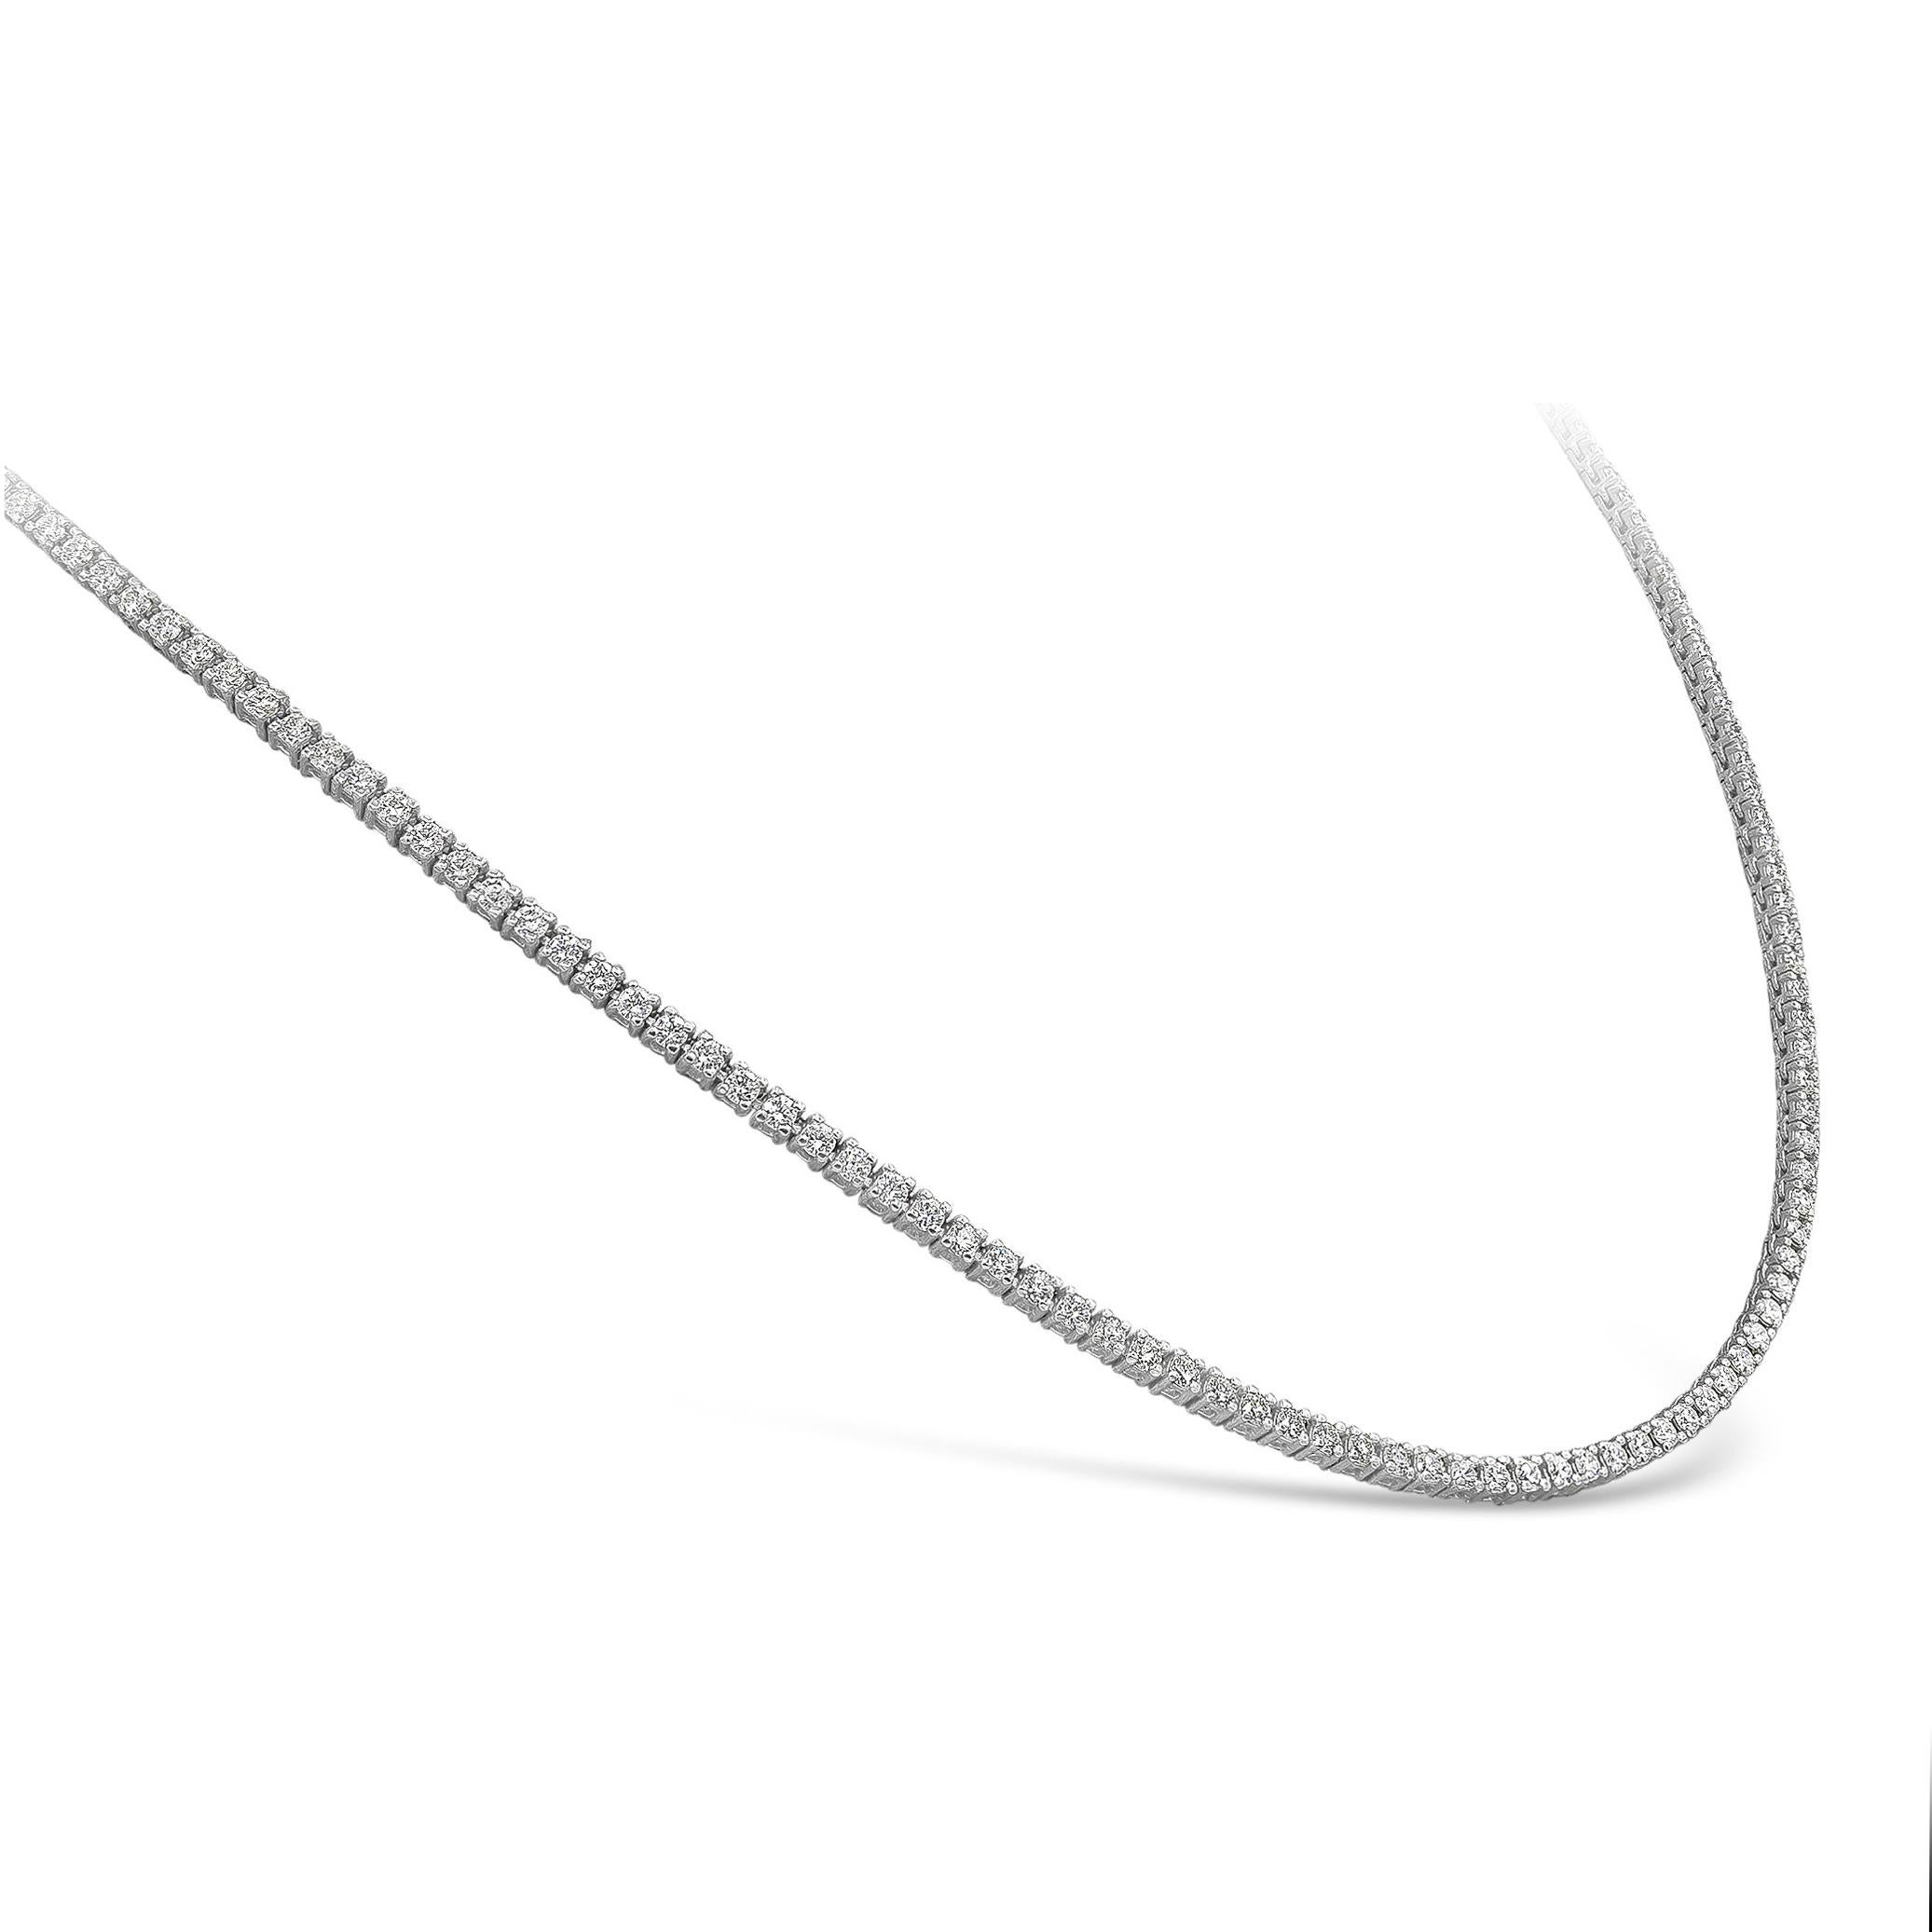 A simple tennis necklace showcasing a row of round brilliant diamonds weighing 2.62 carats total, set in a polished 14k white gold mounting. 

Style available in different price ranges. Prices are based on your selection. Please contact us for more